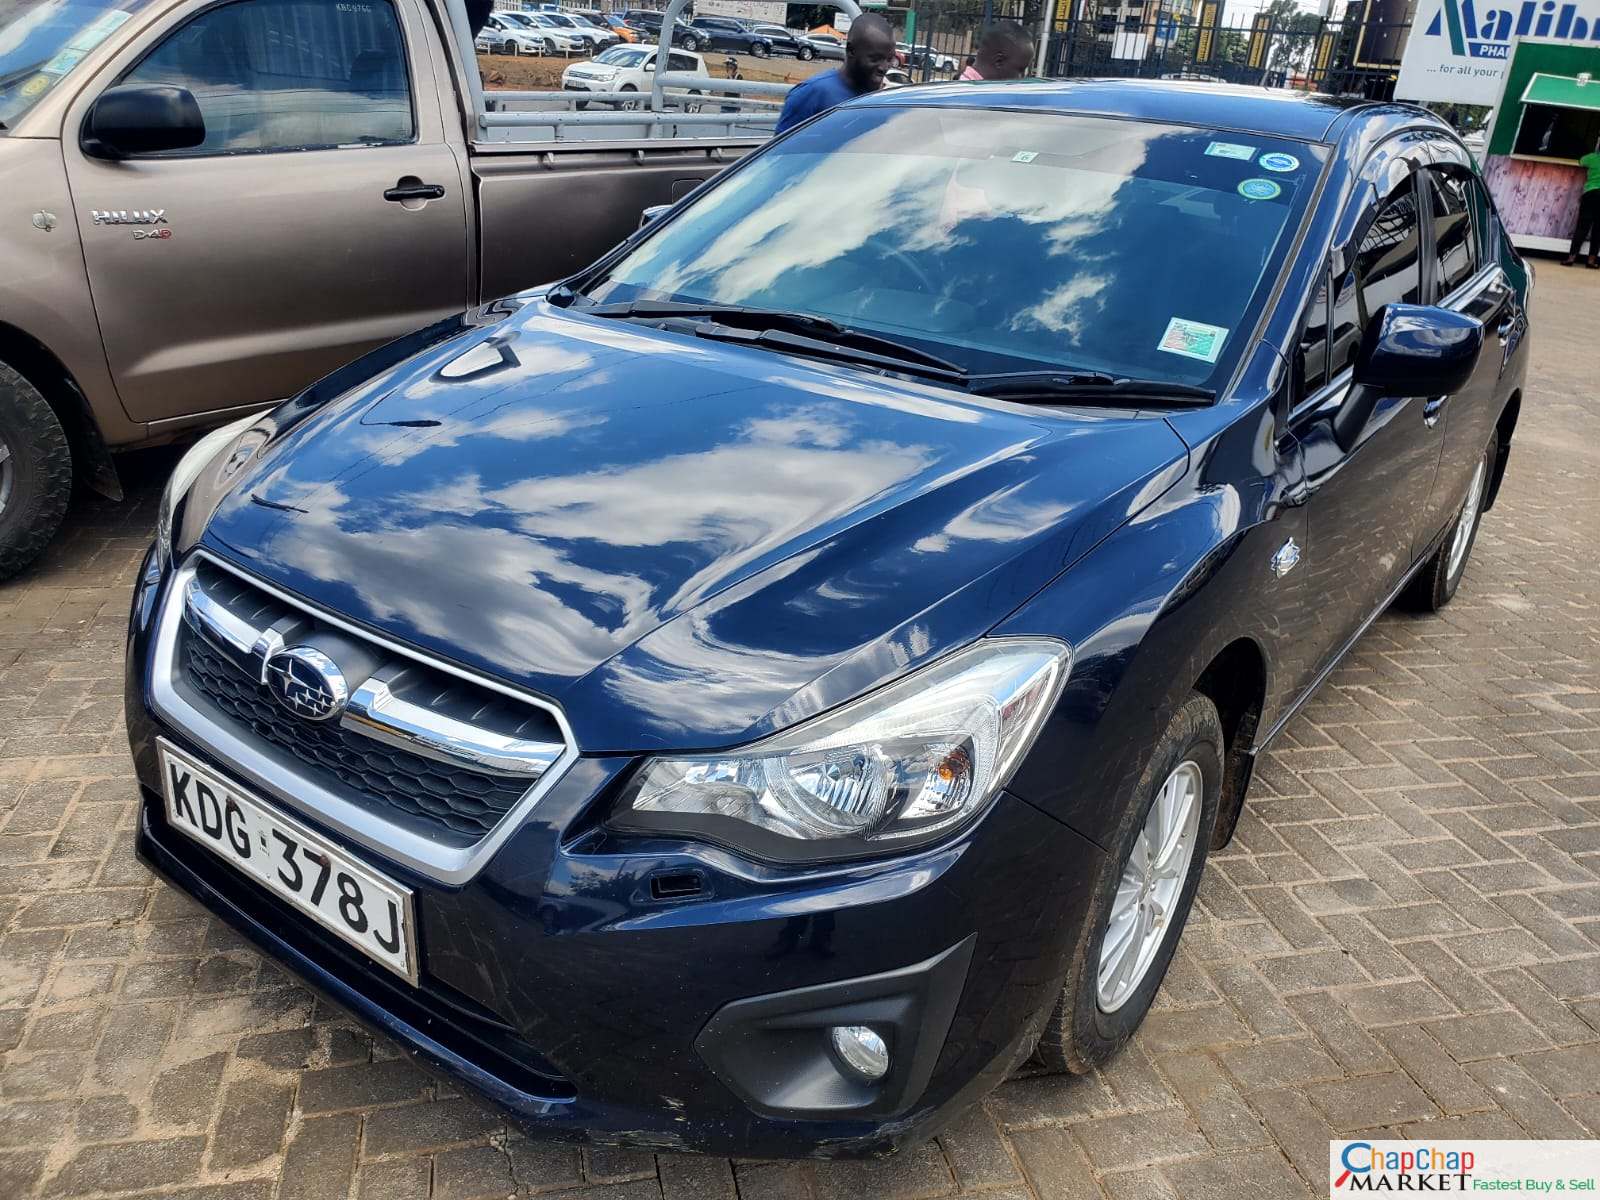 Cars Cars For Sale-Subaru Impreza G4 QUICK SALE You Pay 30% deposit Trade in Ok Impreza for sale in kenya hire purchase installments EXCLUSIVE 4